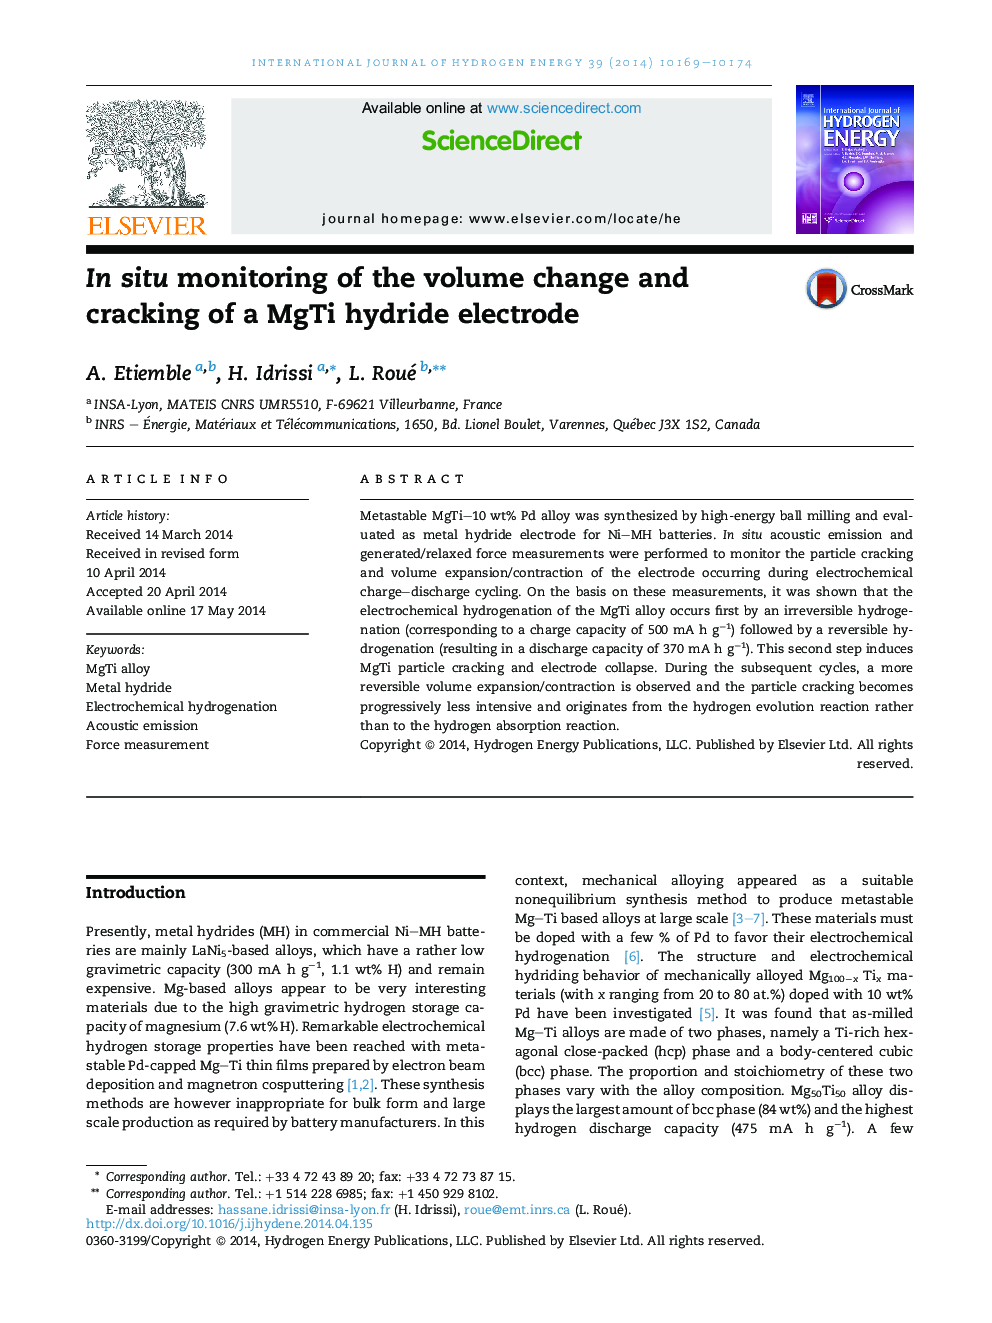 In situ monitoring of the volume change and cracking of a MgTi hydride electrode